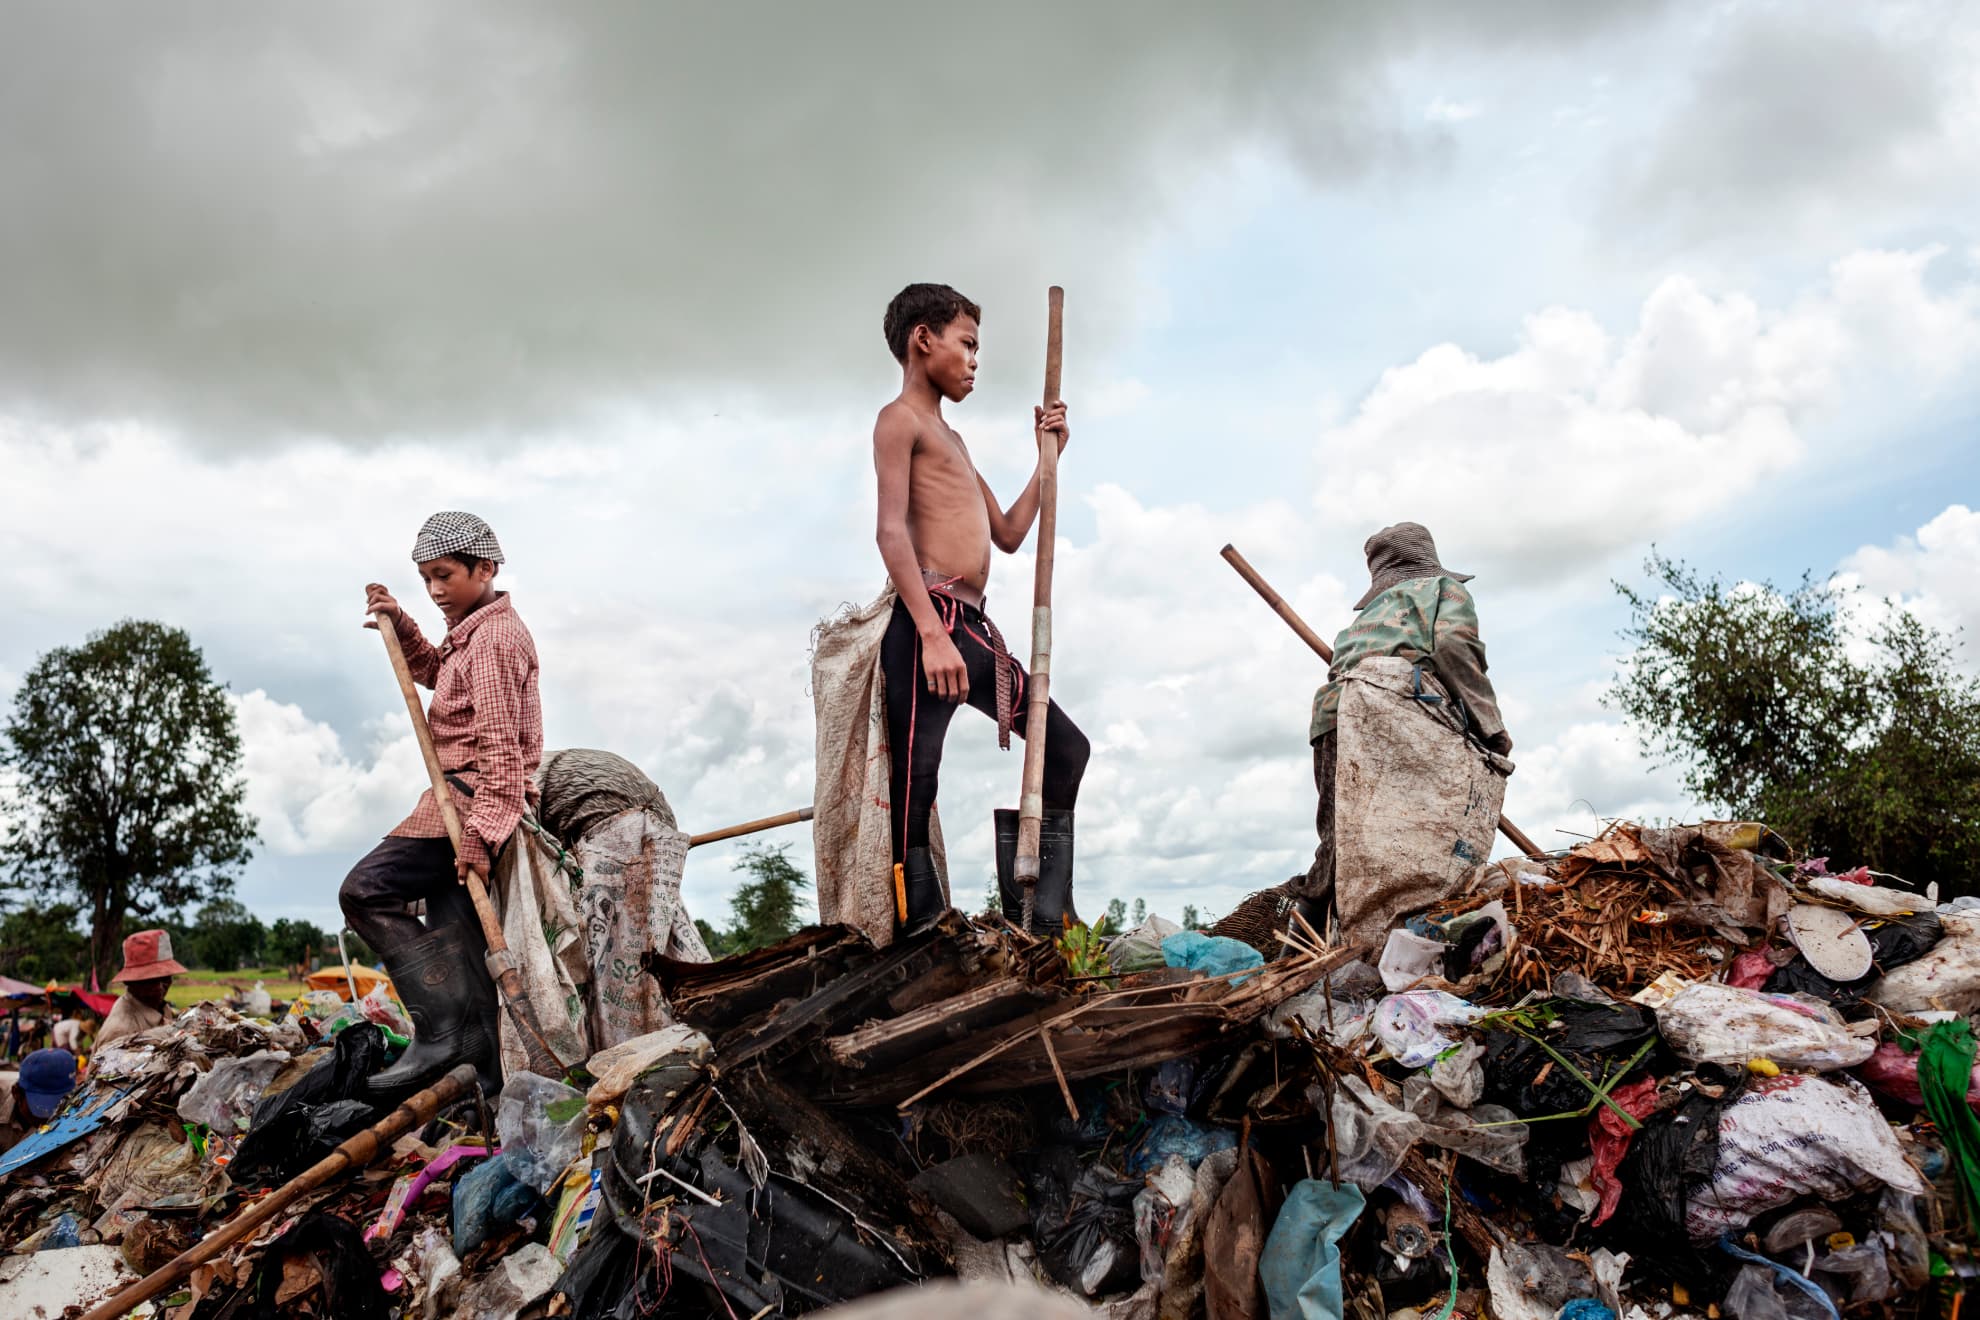 Kon Mai, aged 15, stands atop a mountain of rubbish. He began to work there at the age of 12 and had to leave school because his parents, also work in the rubbish dump, conti-nuously needed to go from one place to another to seek work. Kon Mai has four siblings, all minors. There are problems of domestic violence at home and he wants to leave as soon as he can. In the future, he plans to work in construction.